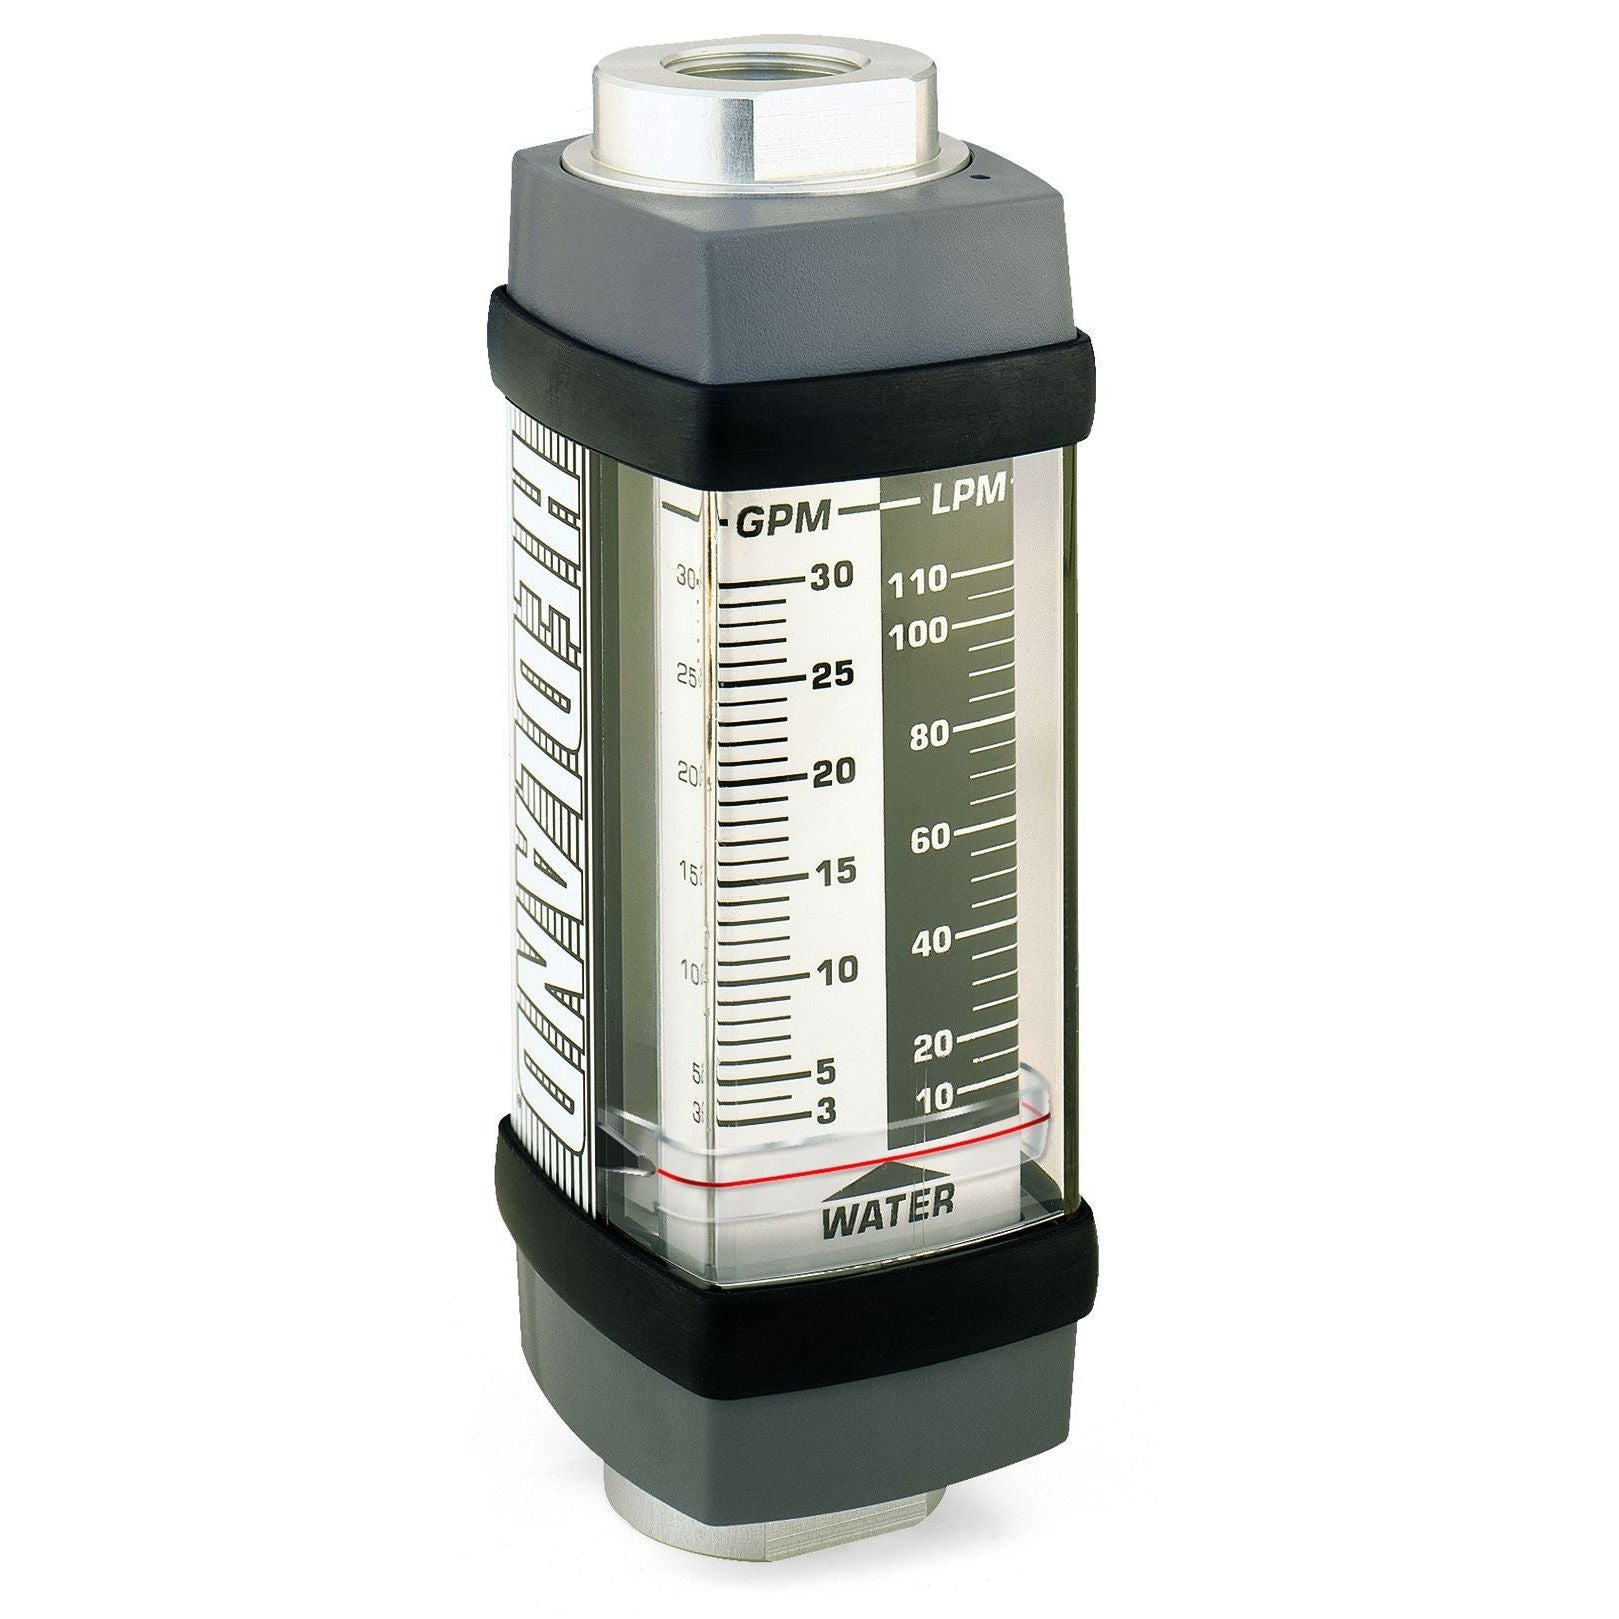 H741X-030 : Hedland 5000psi 316SS Flow Meter for Caustic or Corrosive Liquids, 1 NPT, 3 to 30 GPM